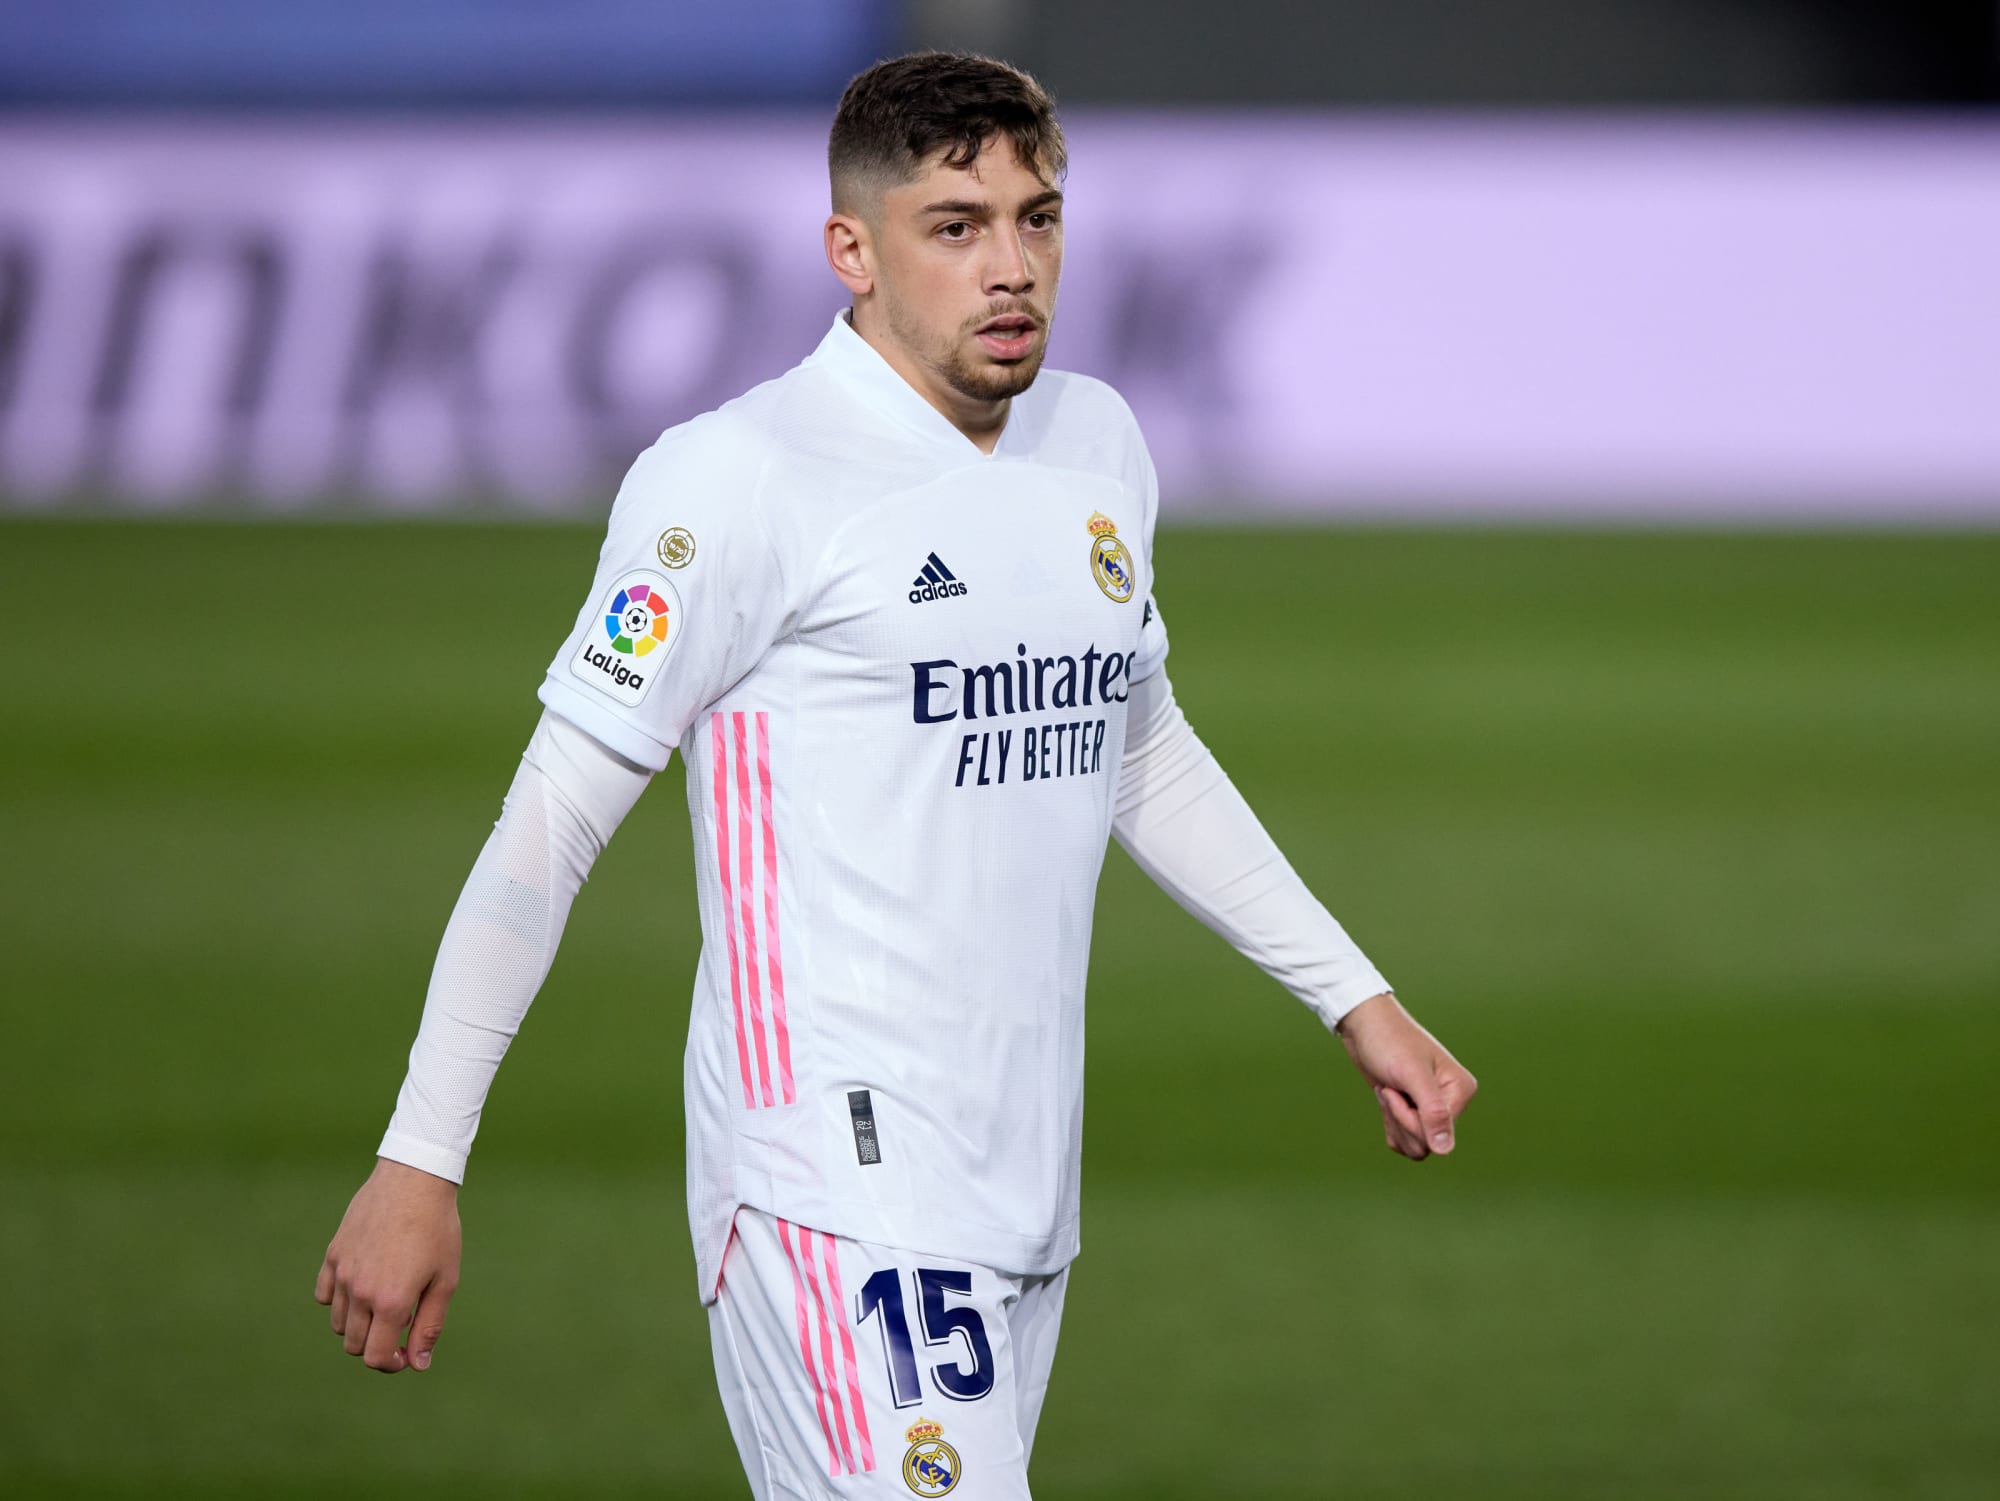 Fede Valverde Injury: Will Real Madrid CM be ready for Liverpool?